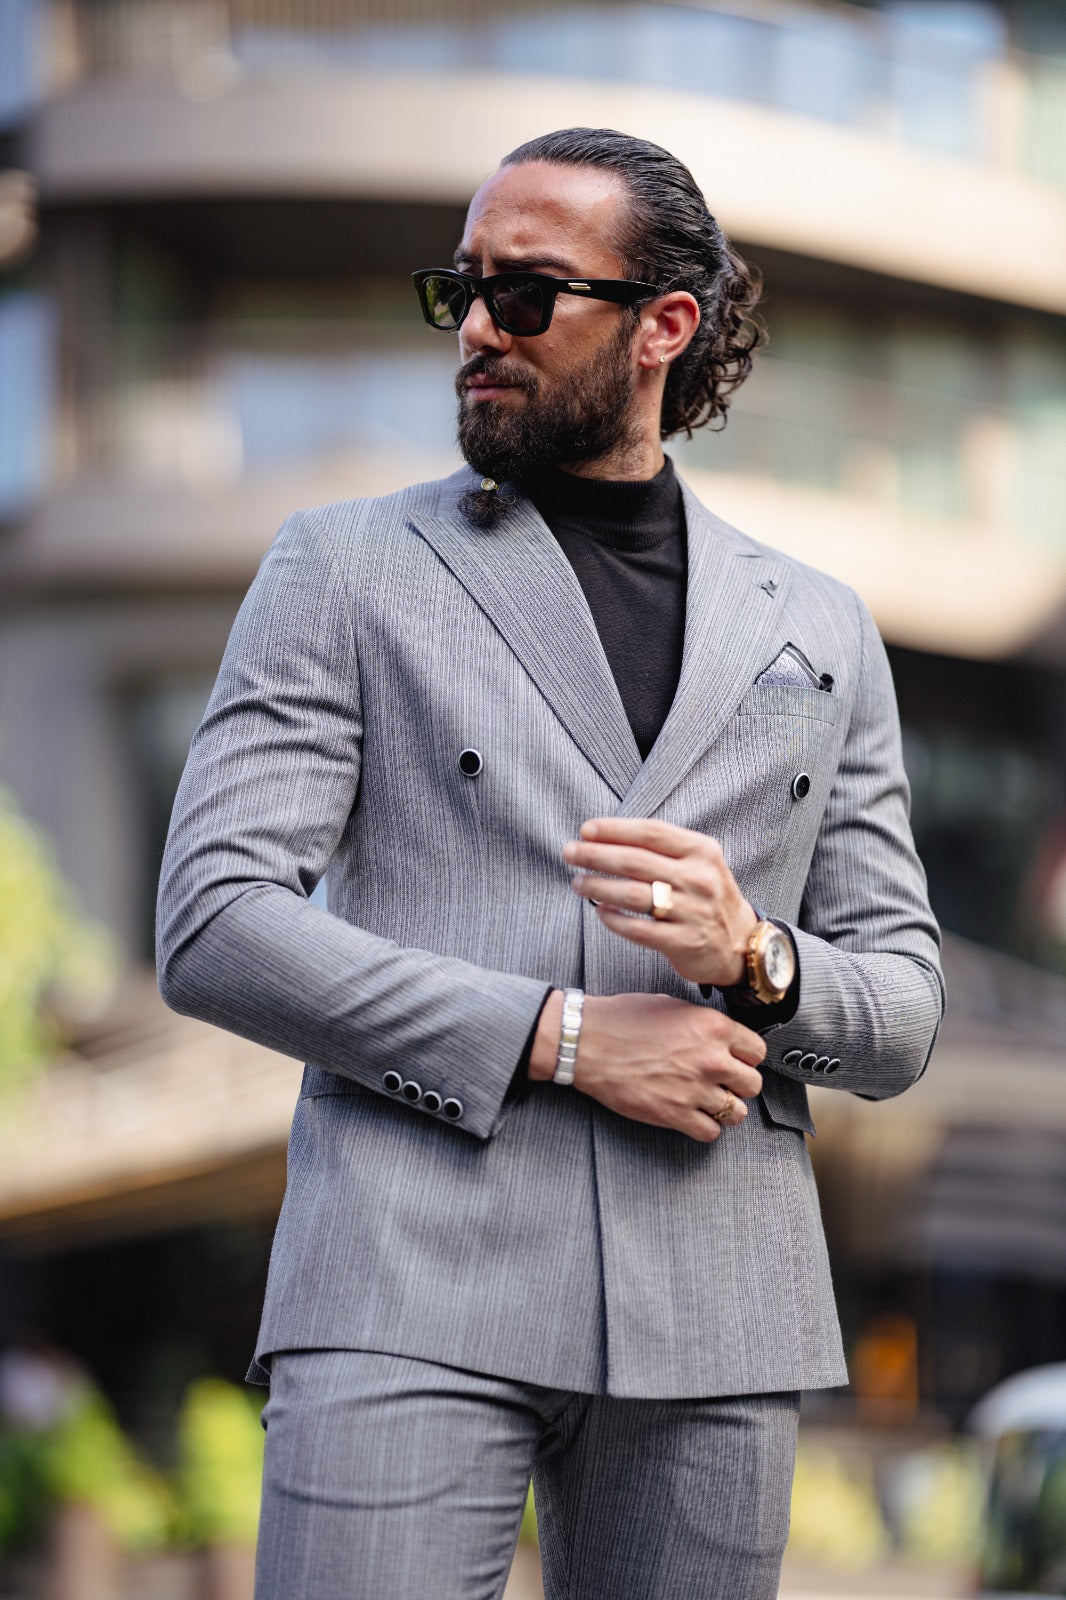 A Gray Slim Fit Double Breasted Suit on display.